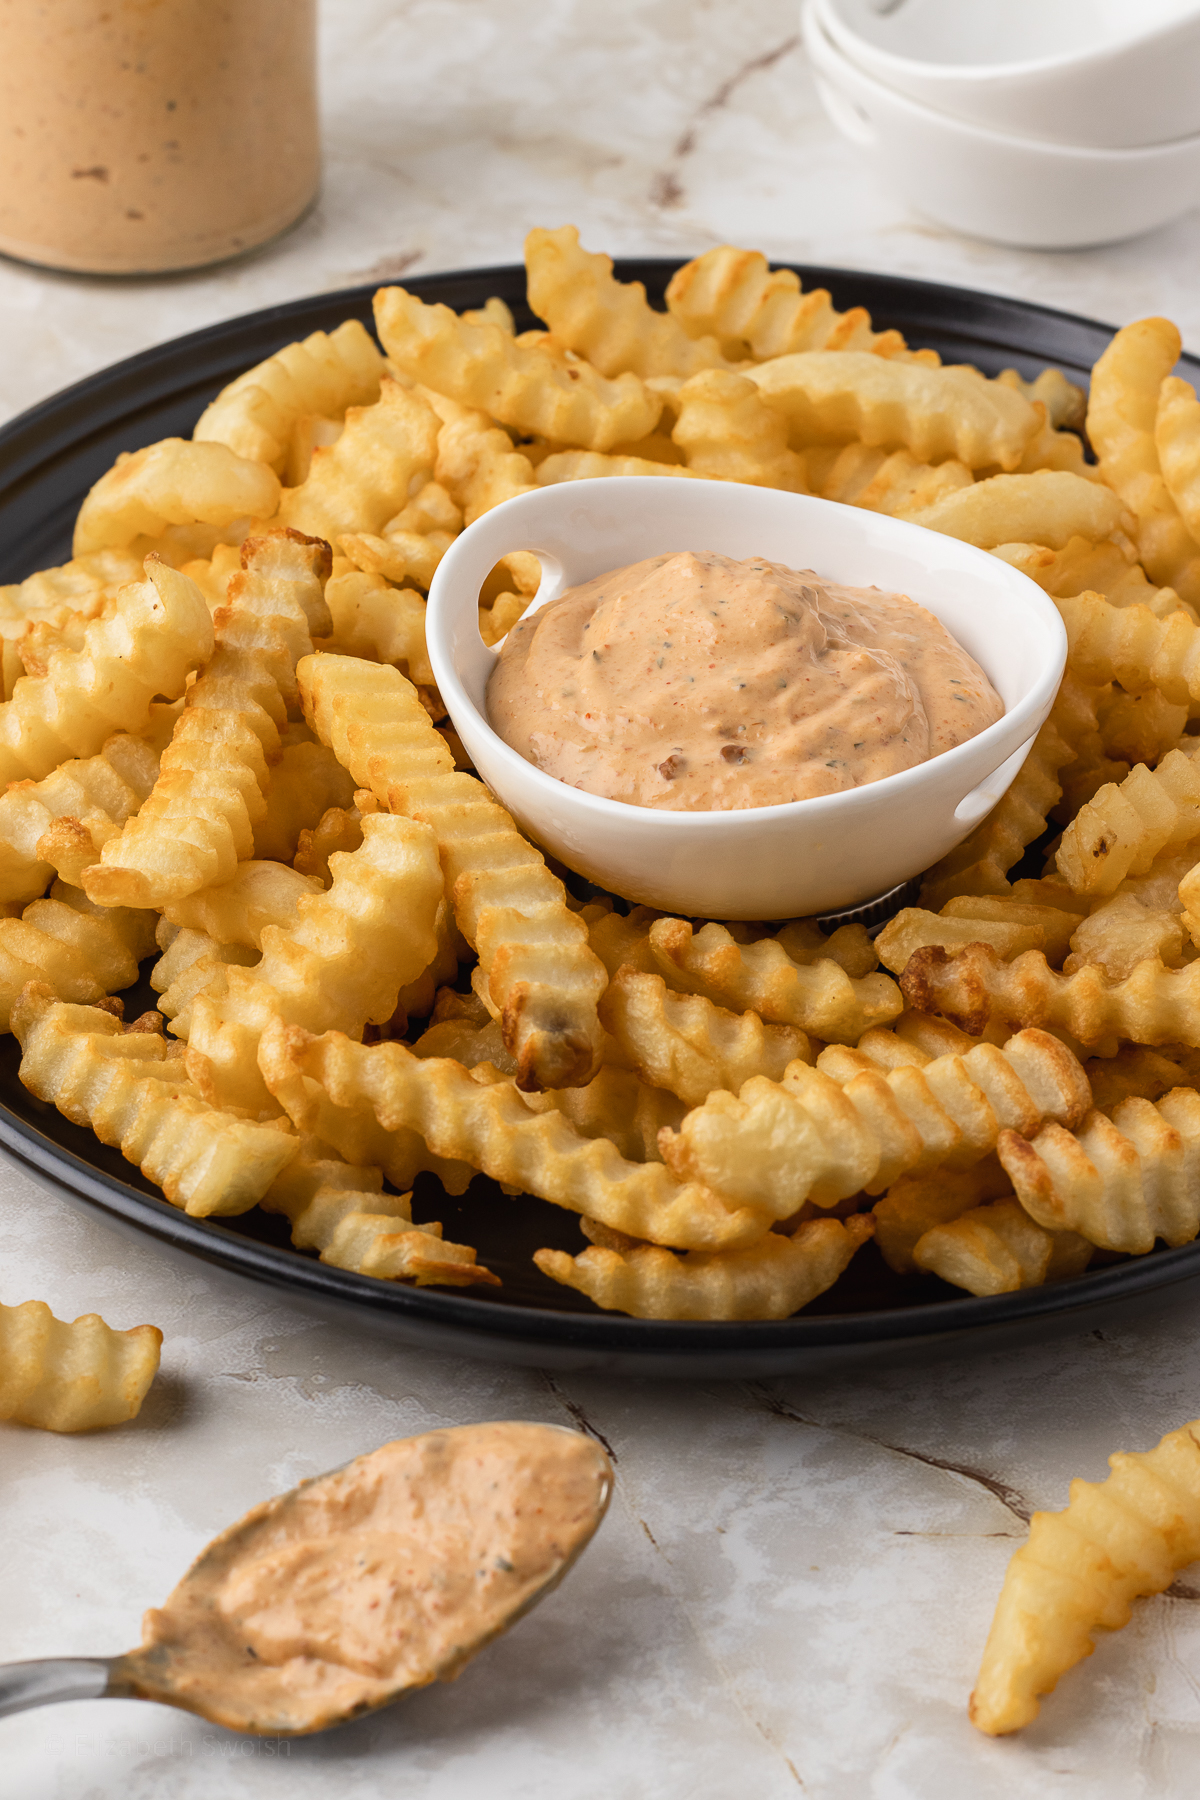 A small dish of Chipotle Southwest Sauce surrounded by crinkle French fries.